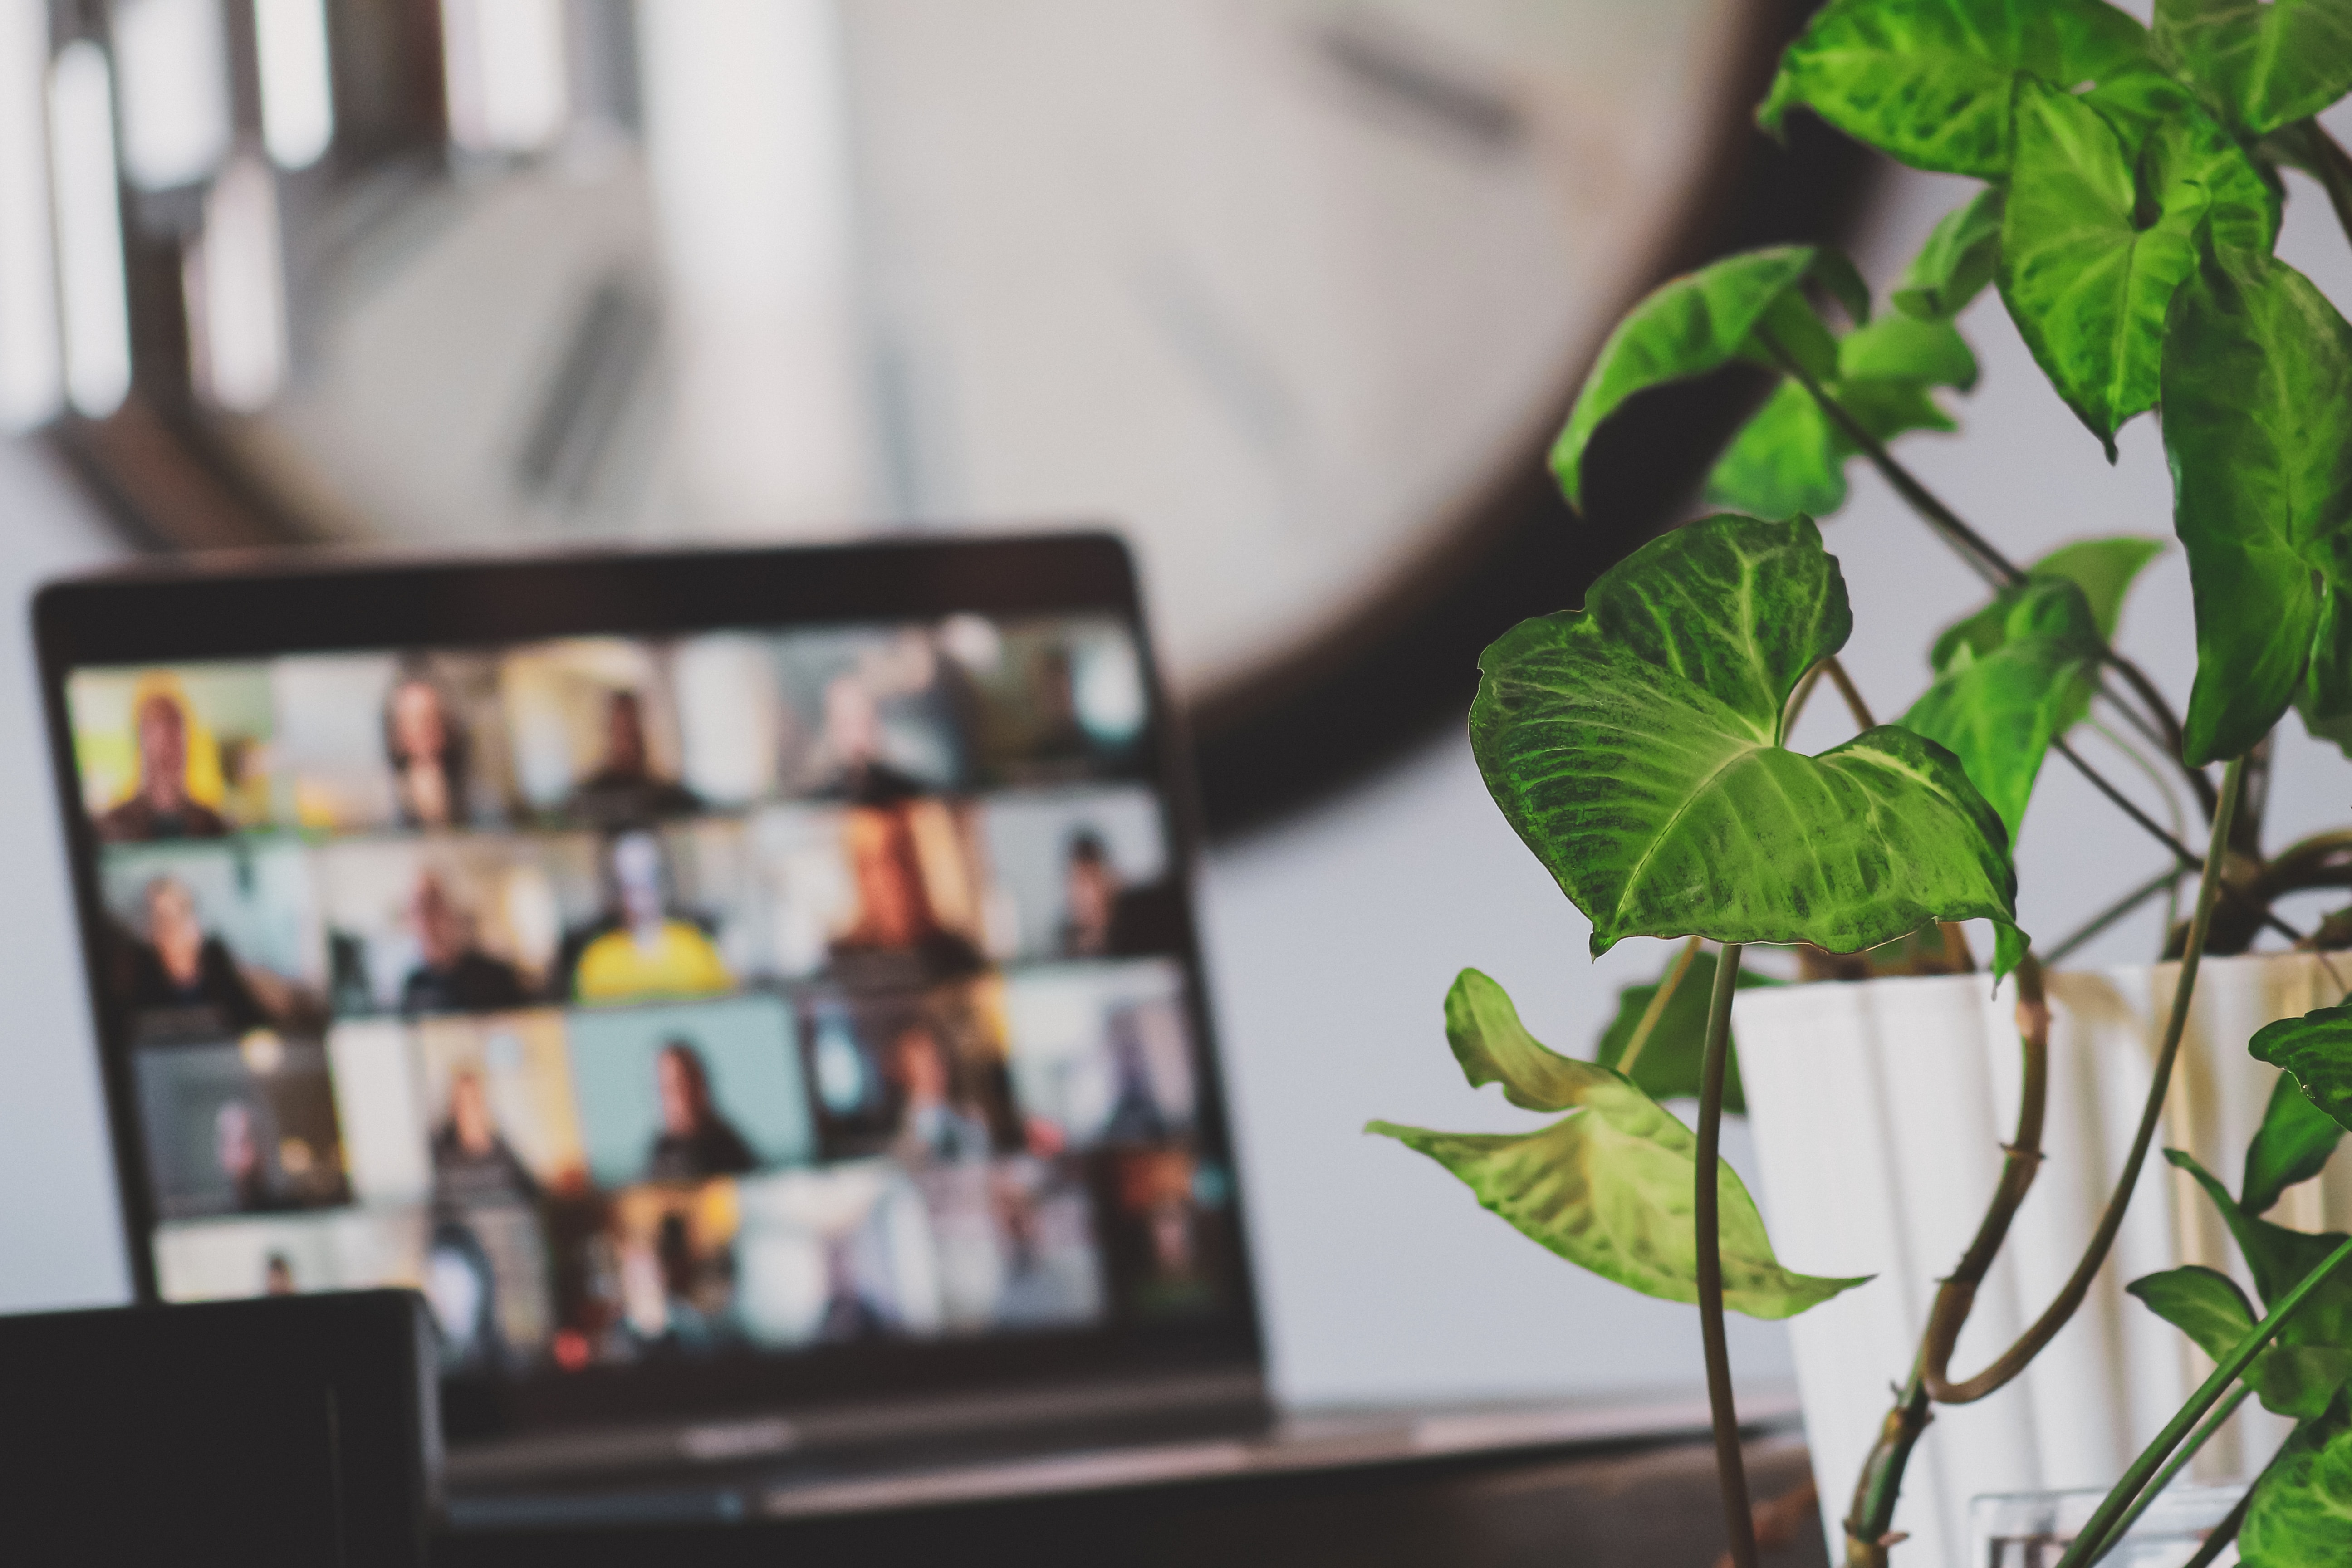 Utilise video conference tools to keep in touch with your team when working remotely